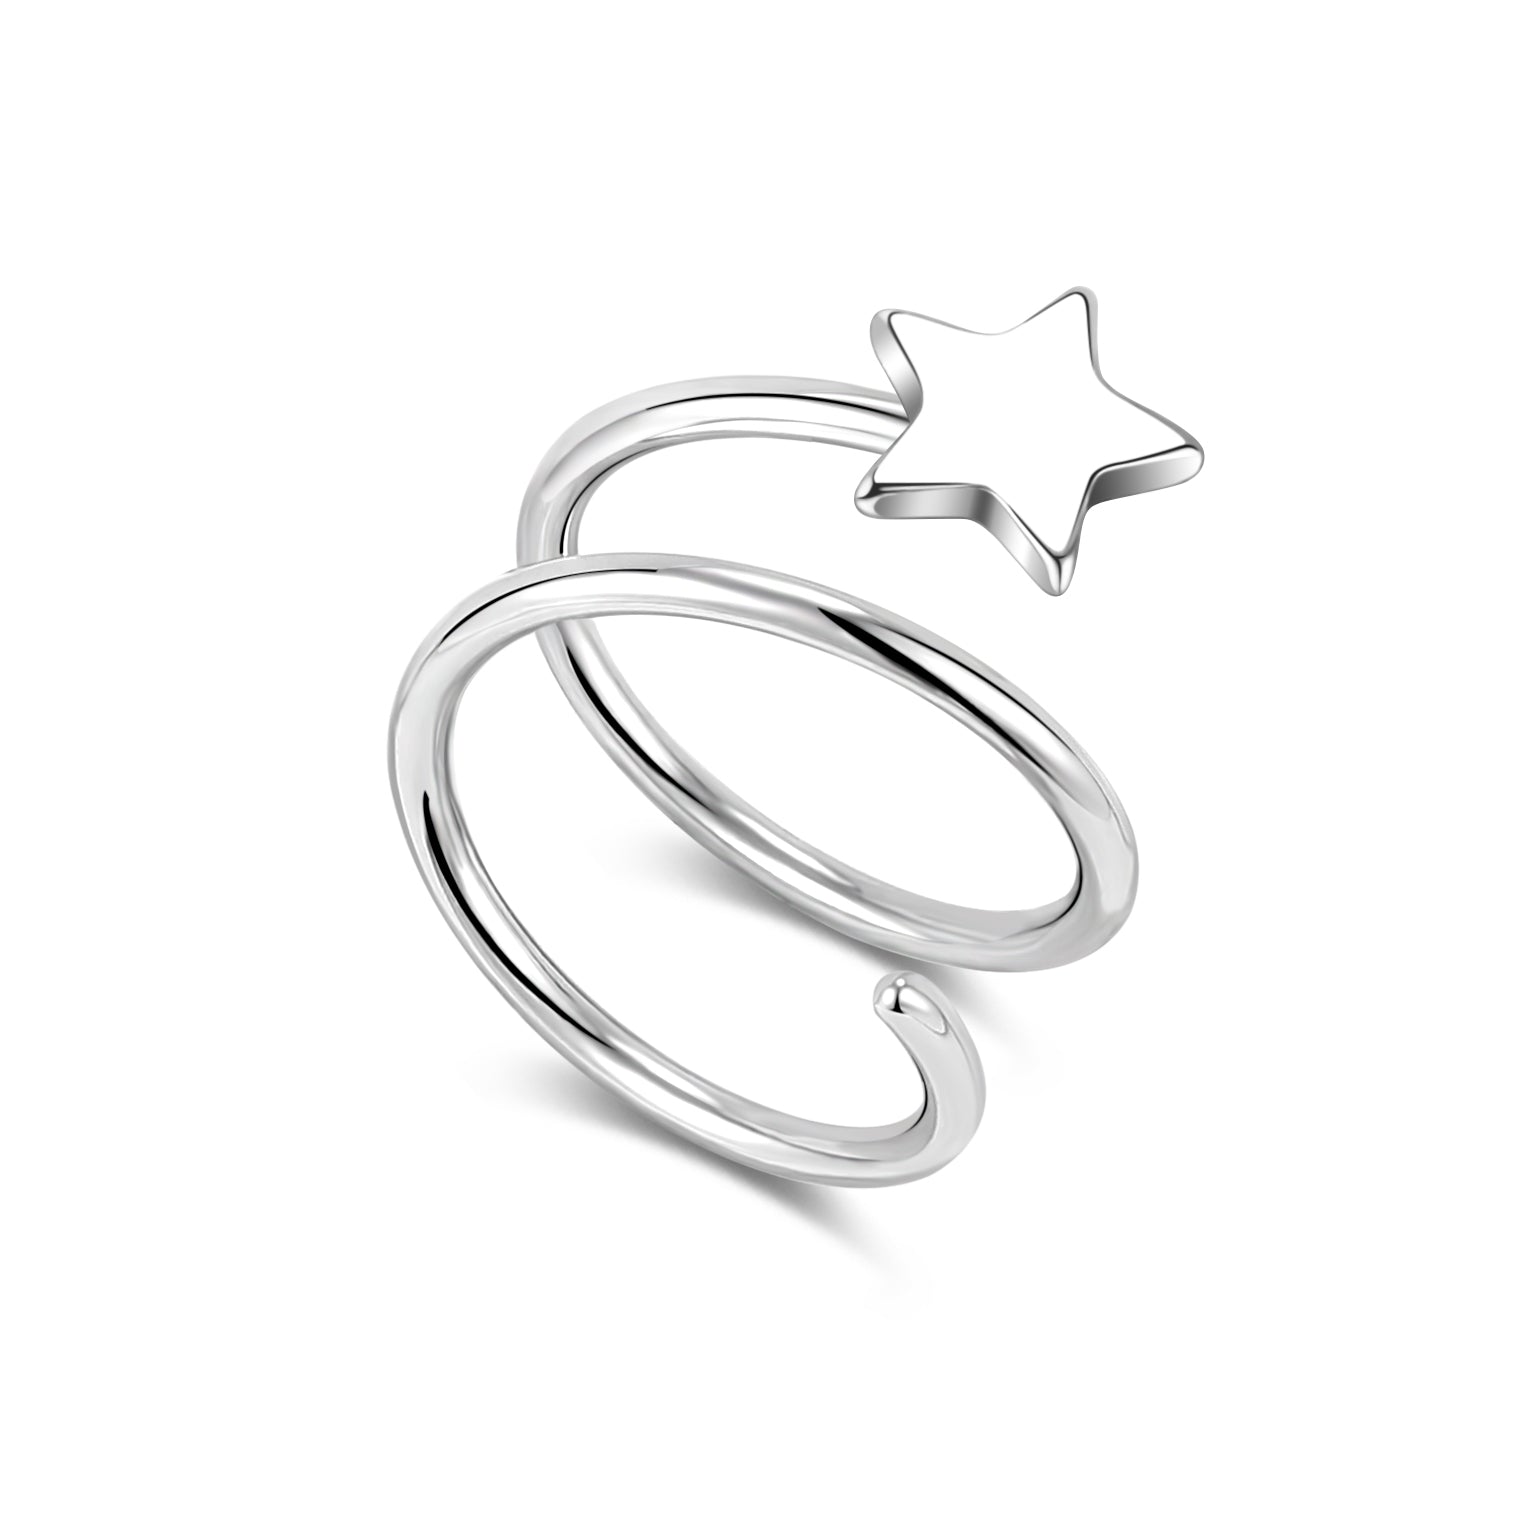 20G-Star-Nose-Rings-Double-Layered-Spiral-Nose-Piercing-Stainless-Steel-Nostril-Rings